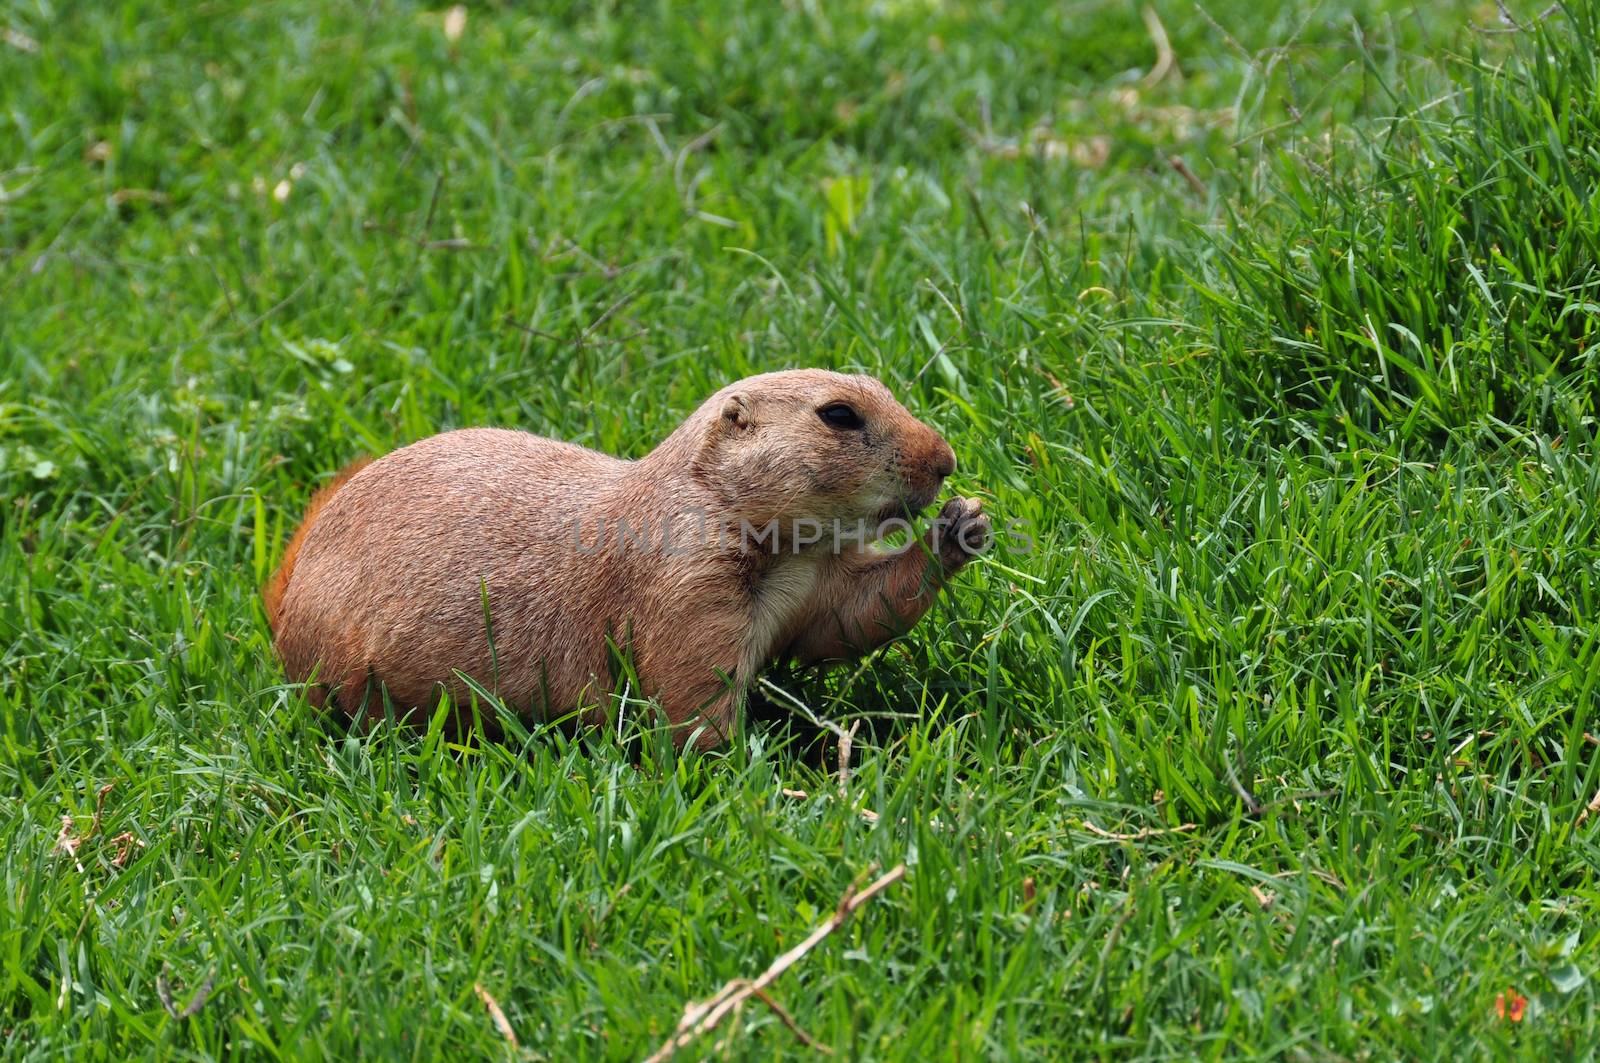 Black-tailed prairie dog rodent eating grass. Animal in natural environment.